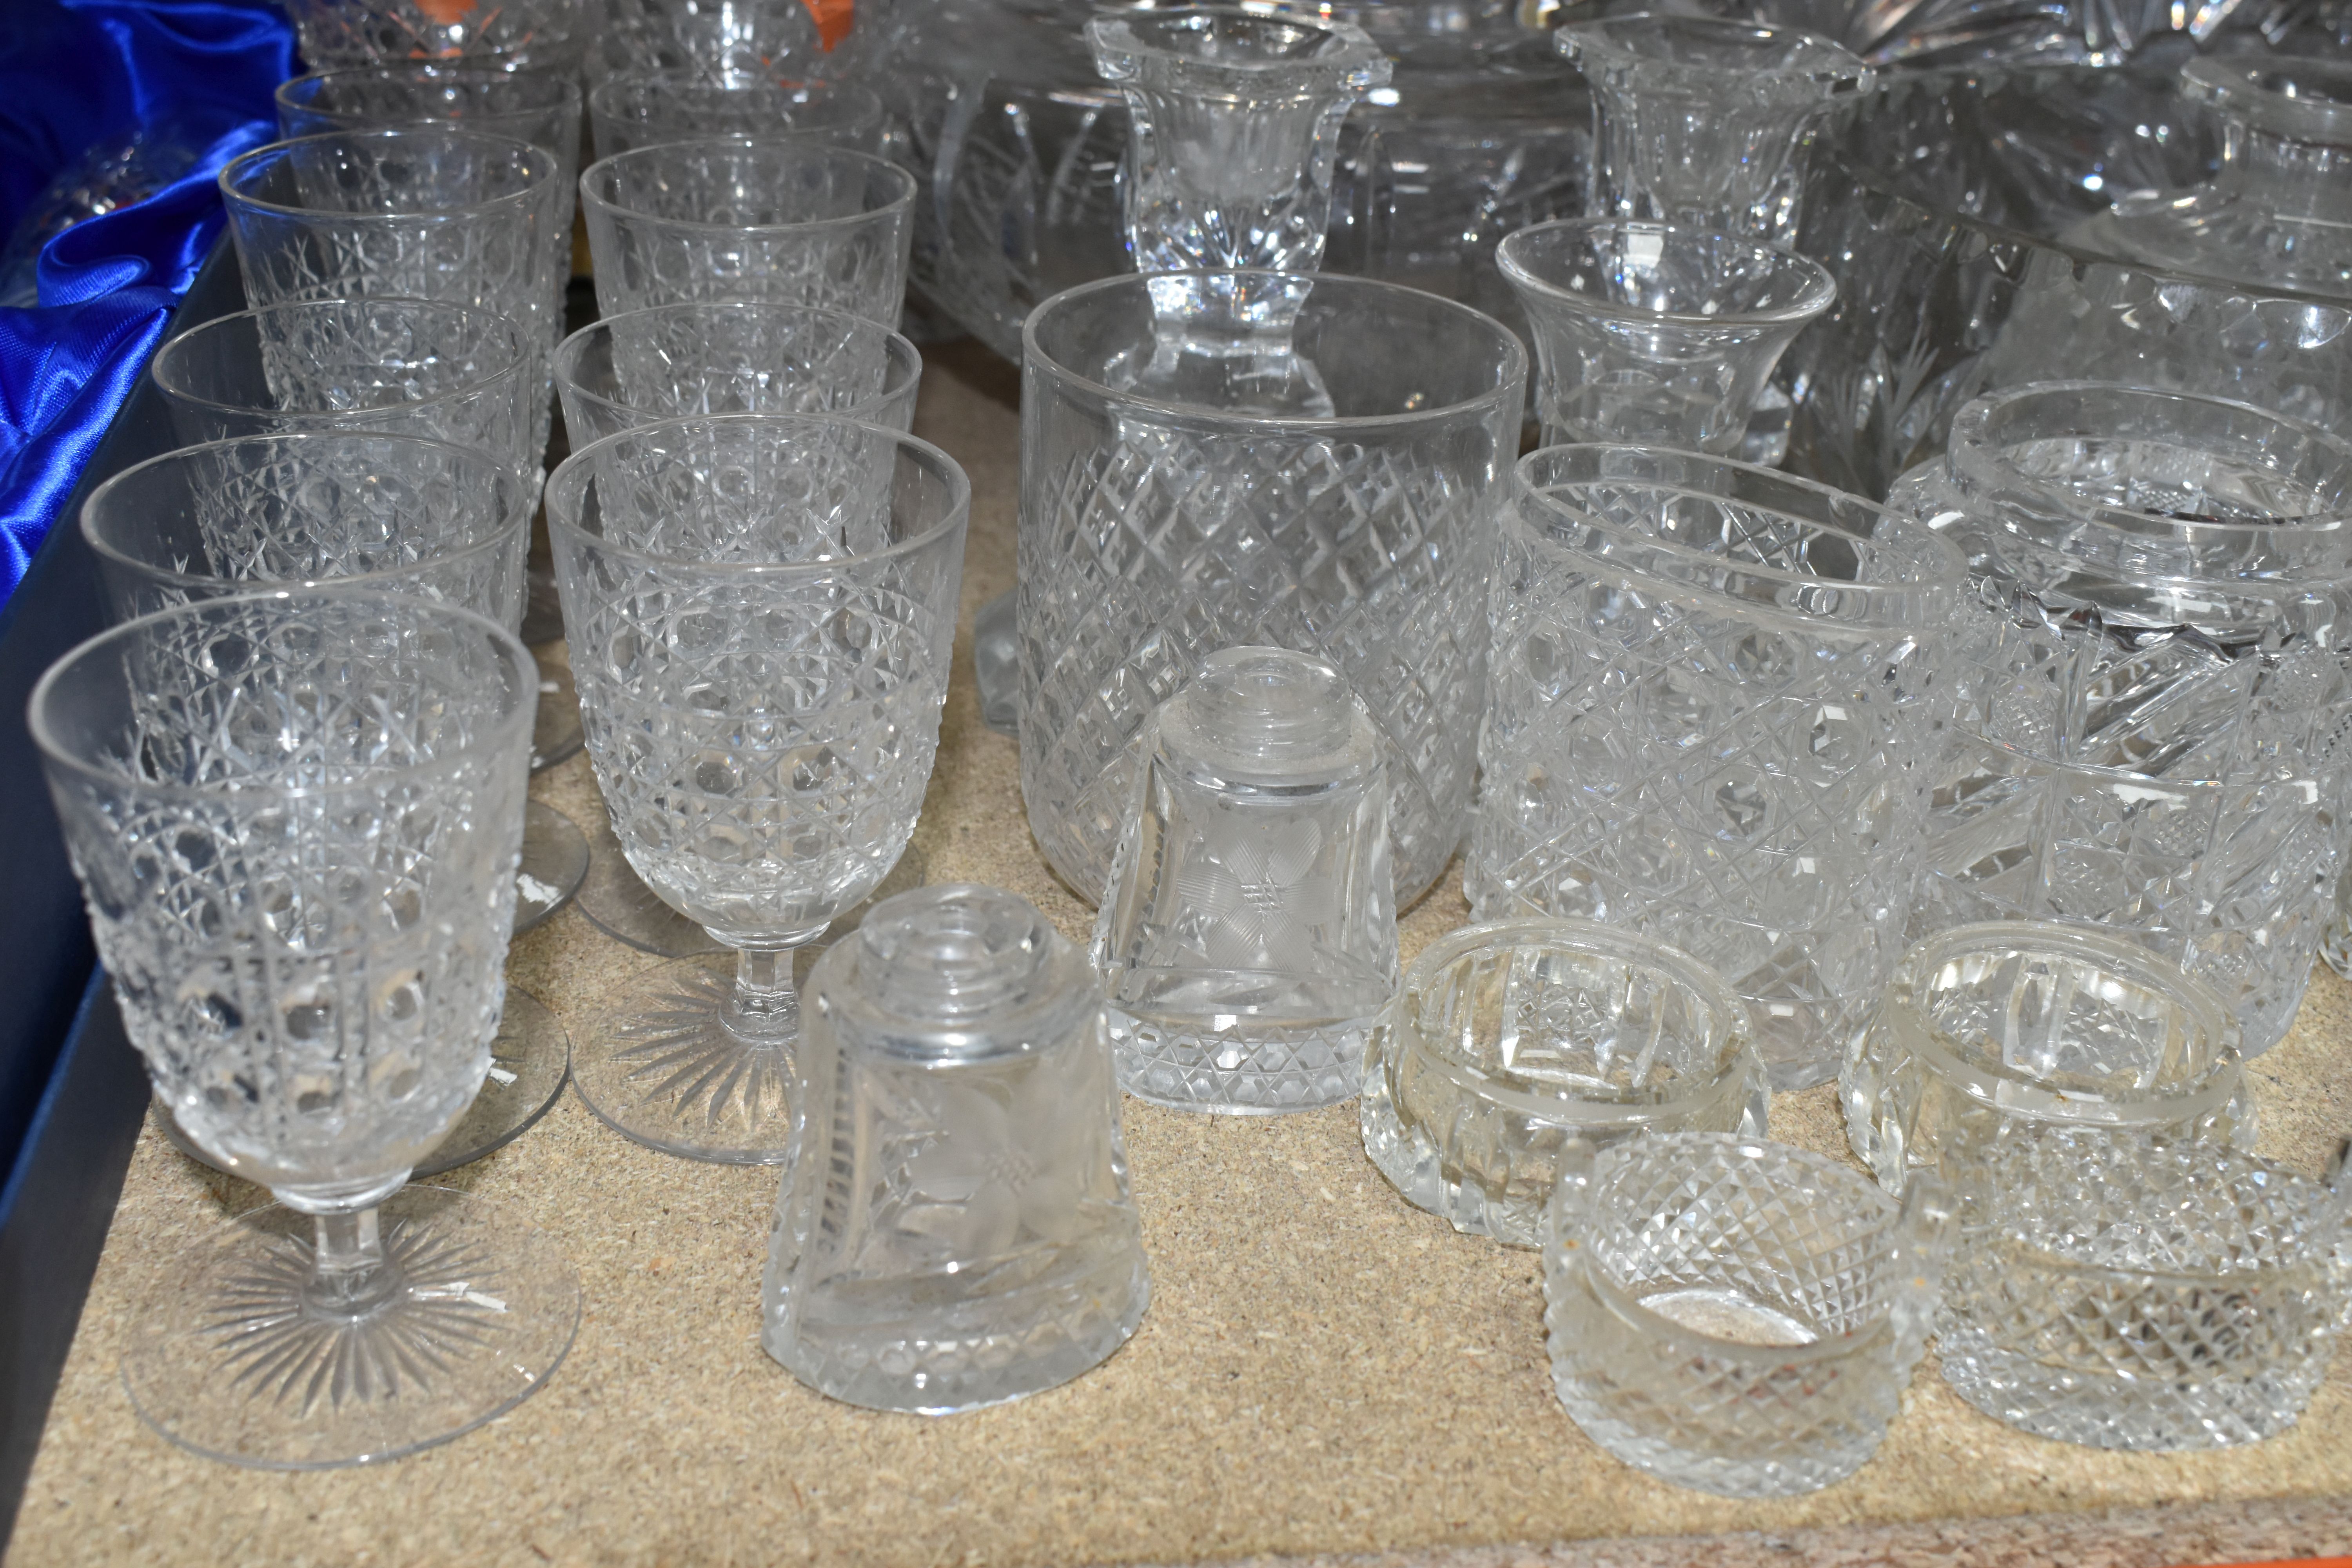 A LARGE VARIETY OF CRYSTAL CUT CLASS DECORATIVE WEAR including six 'Bohemian Crystal' glasses in - Image 3 of 9